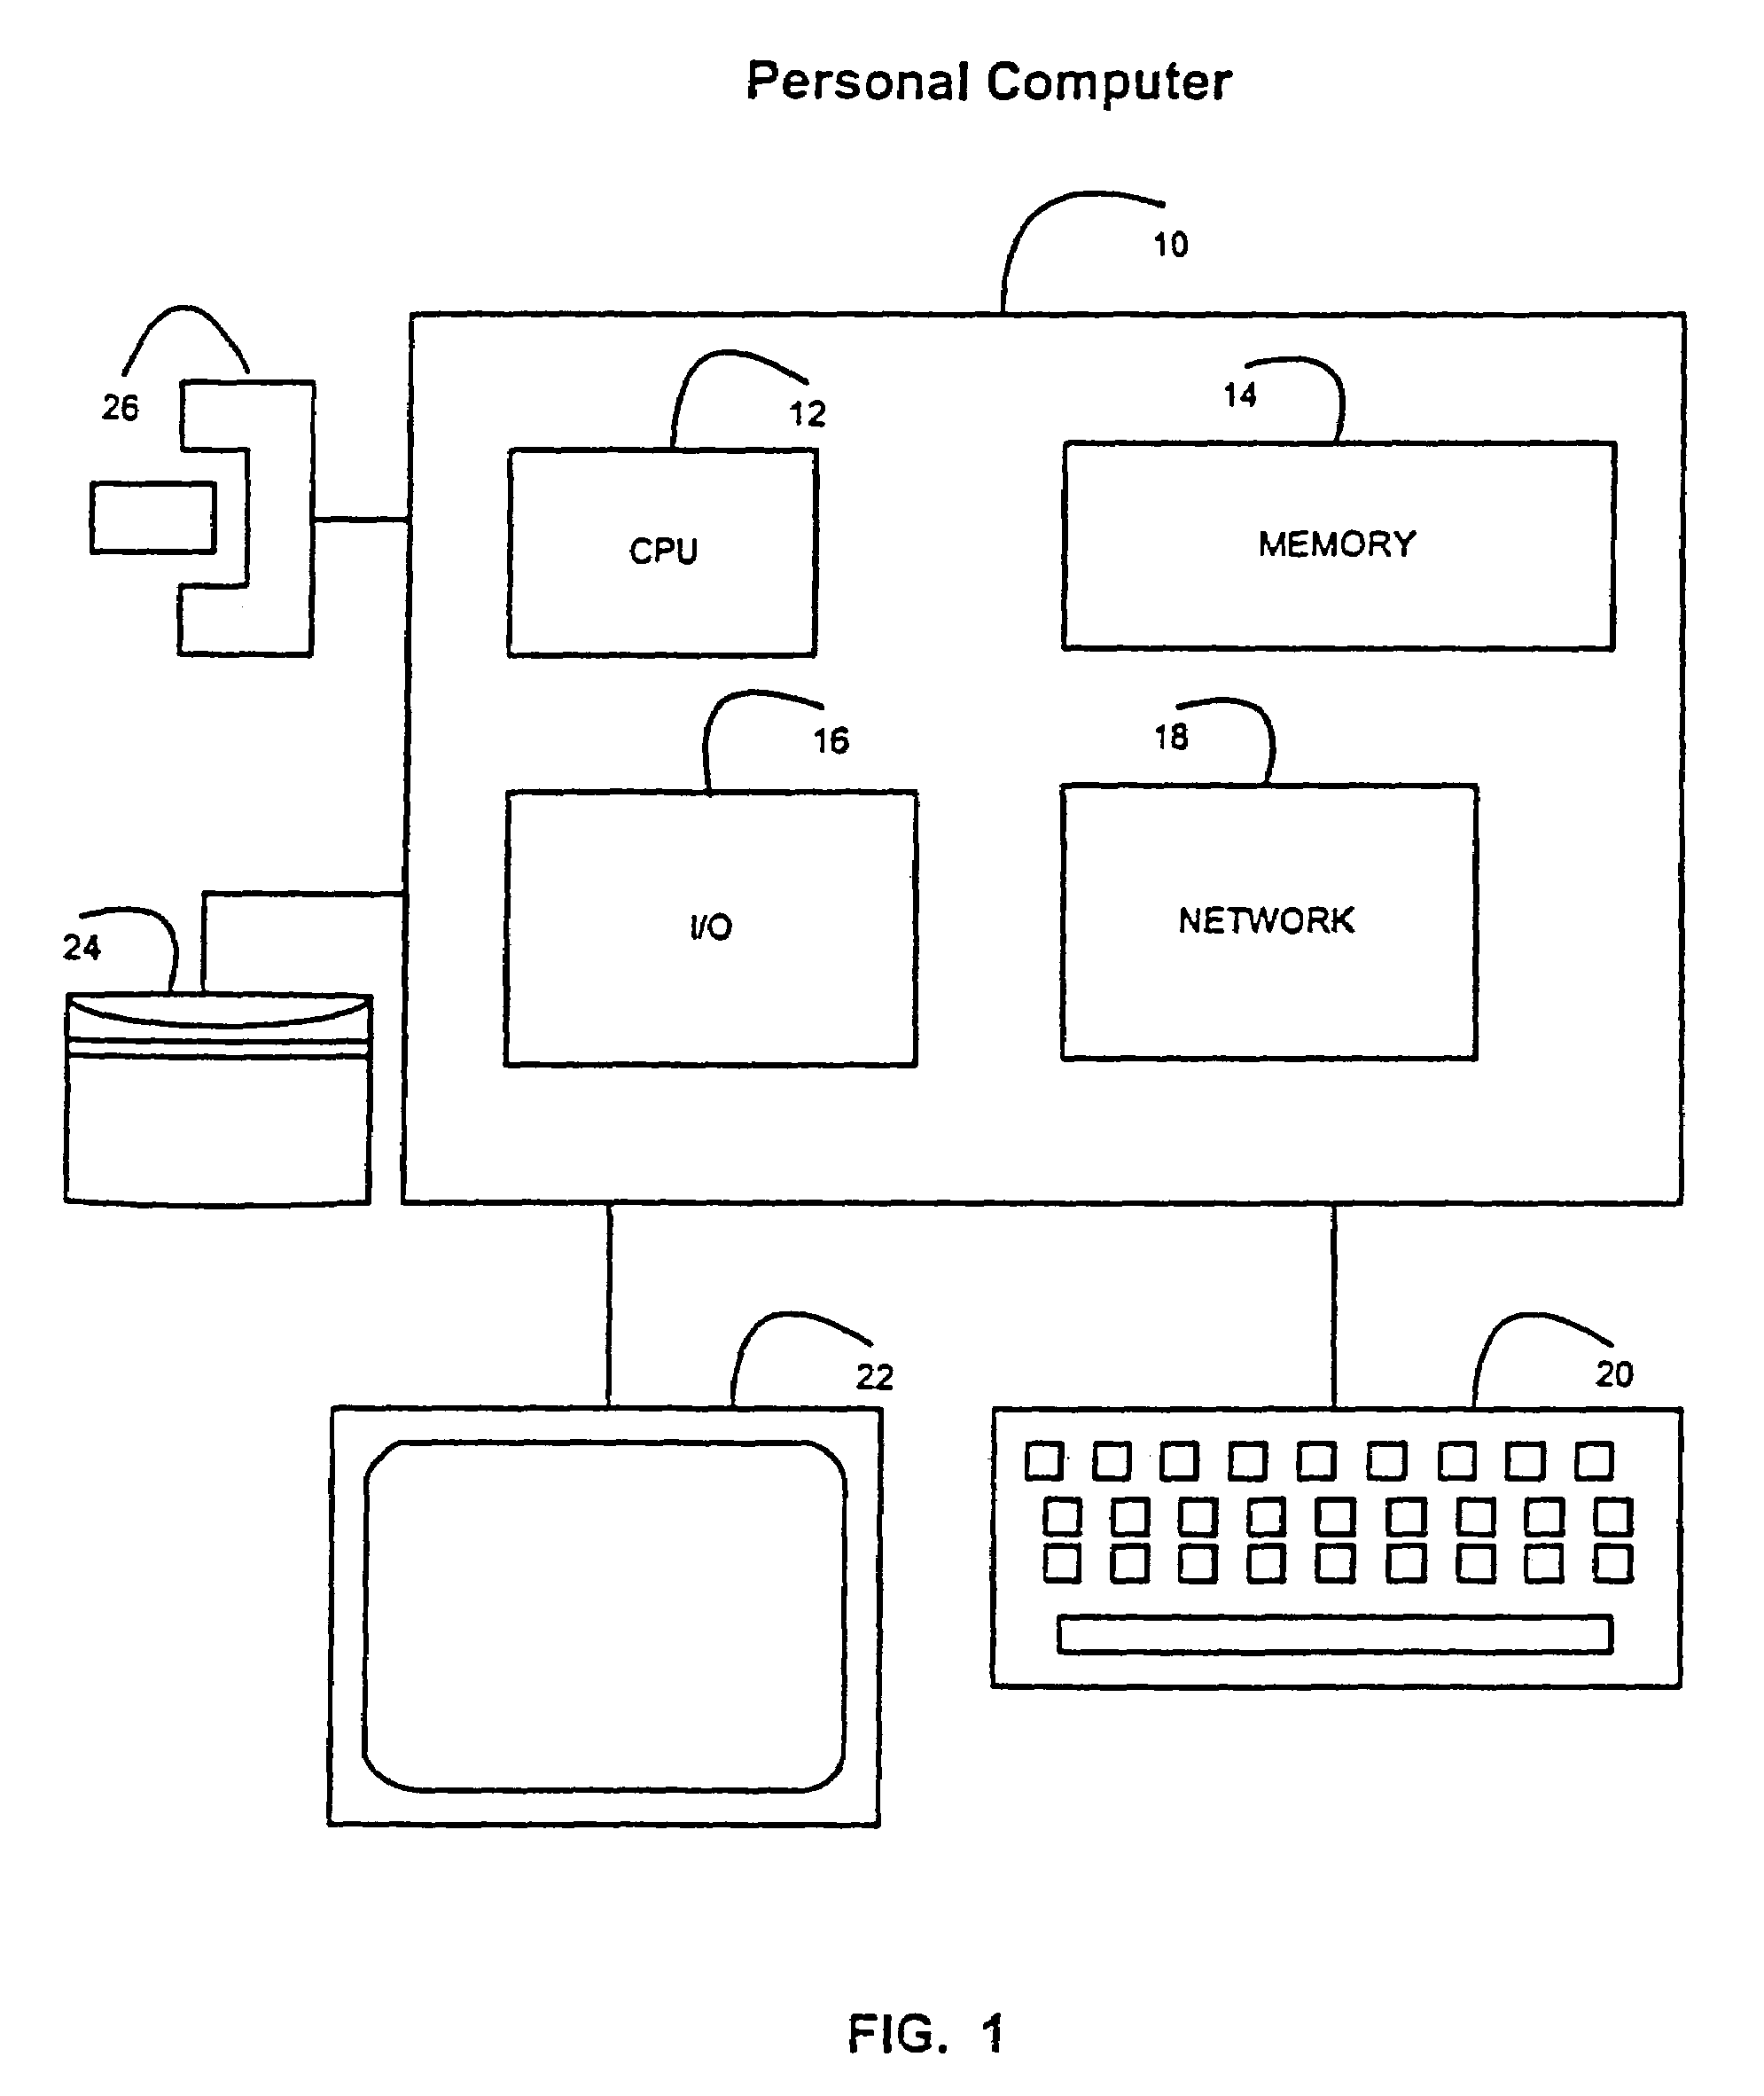 System and method for integrating electrical power grid and related data from various proprietary raw data formats into a single maintainable electrically connected database